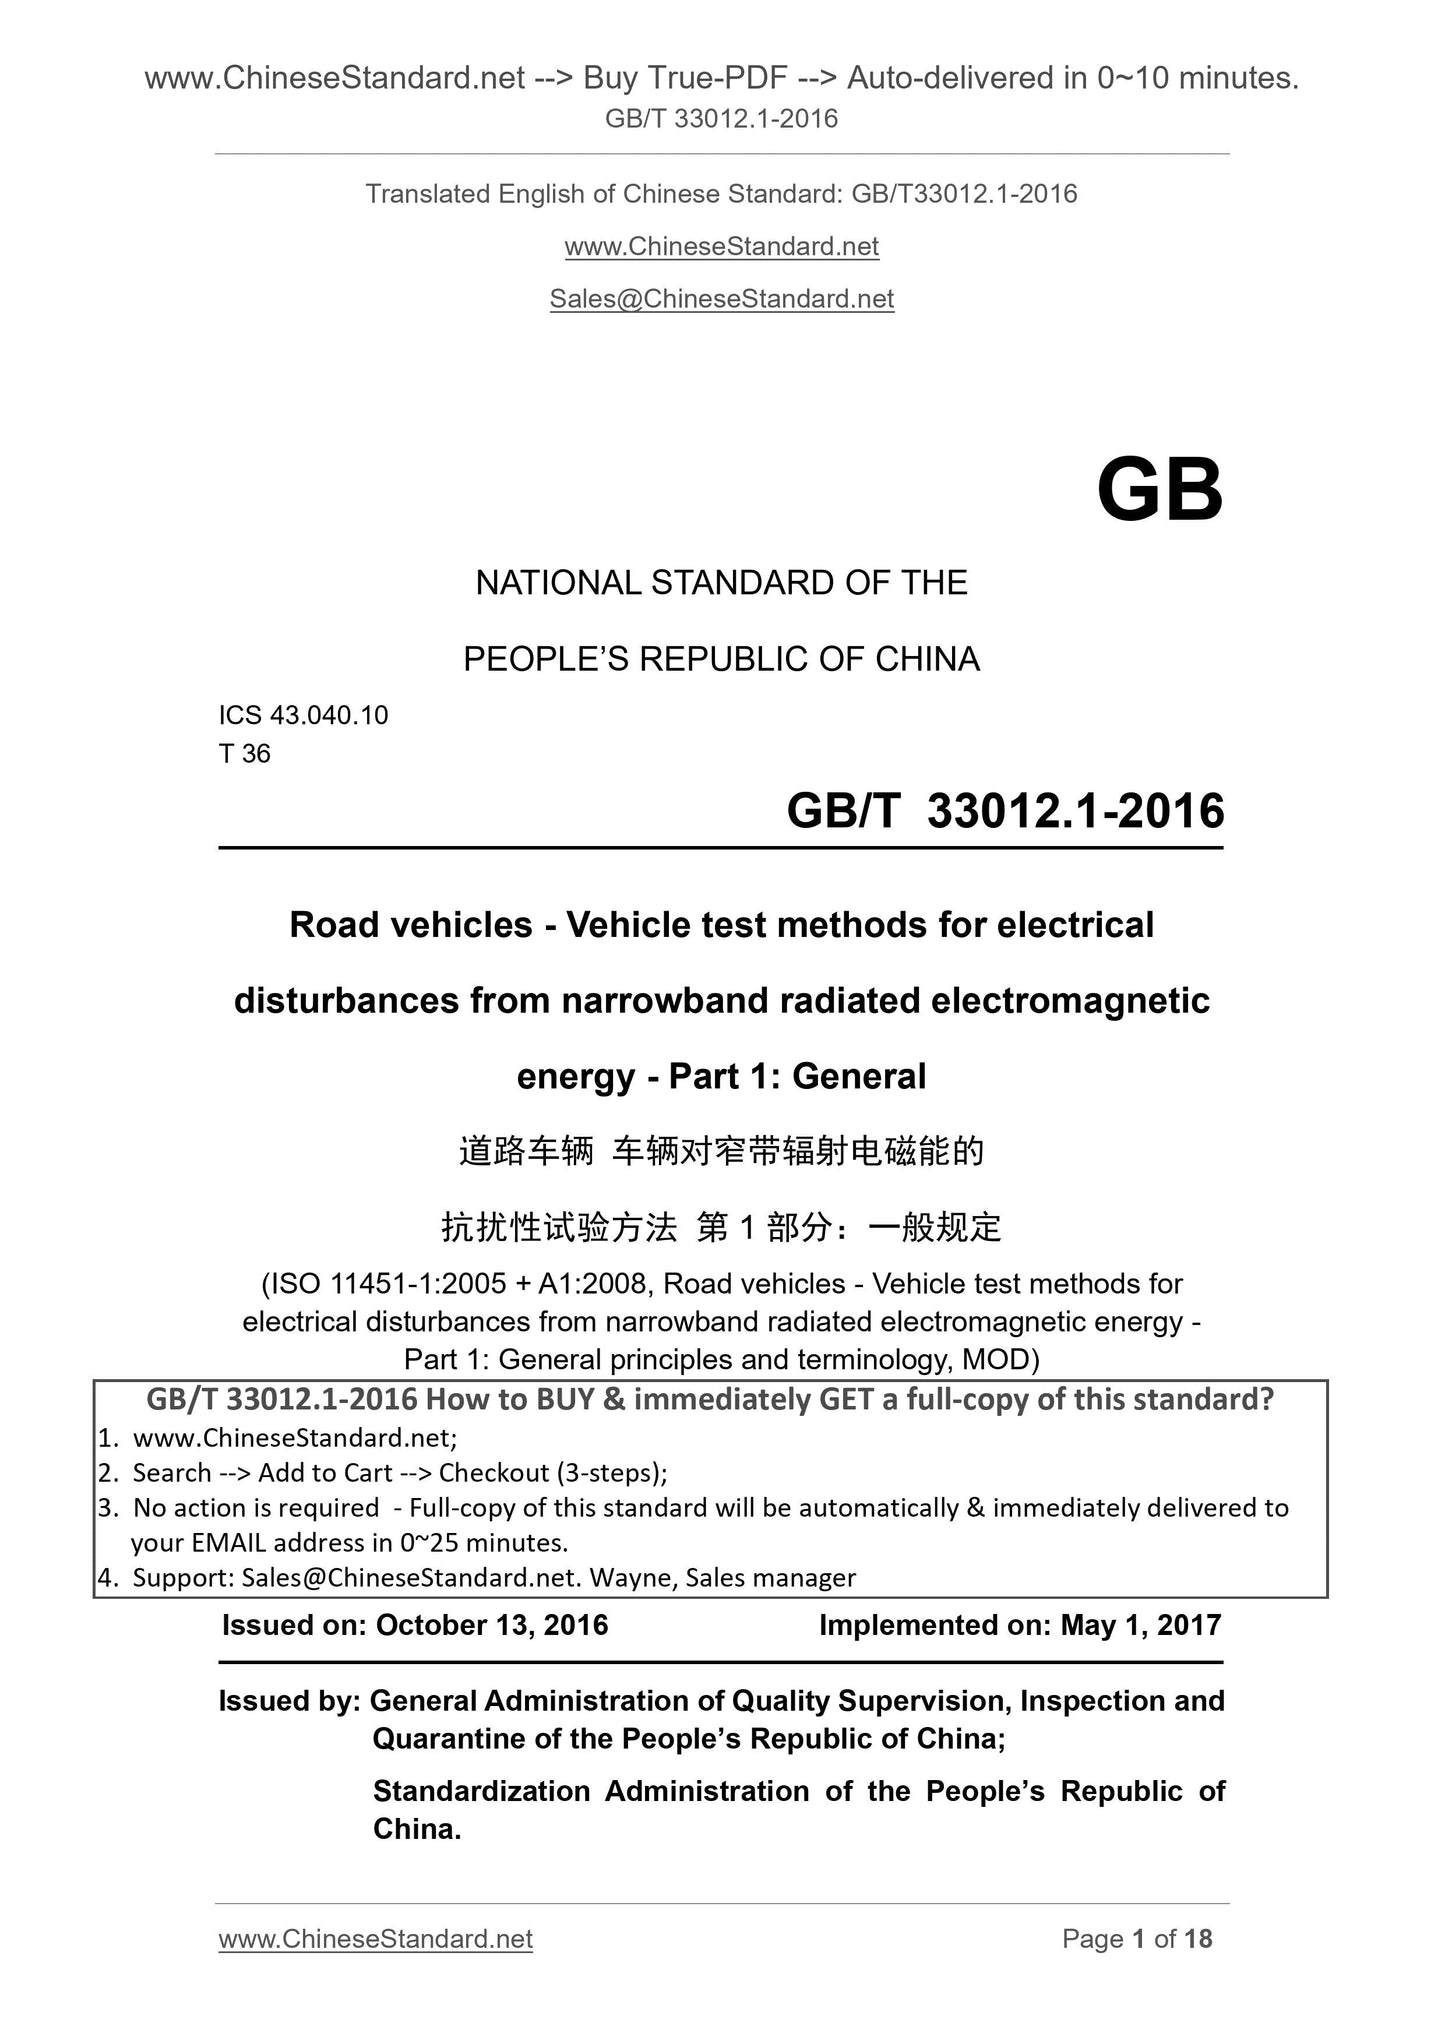 GB/T 33012.1-2016 Page 1